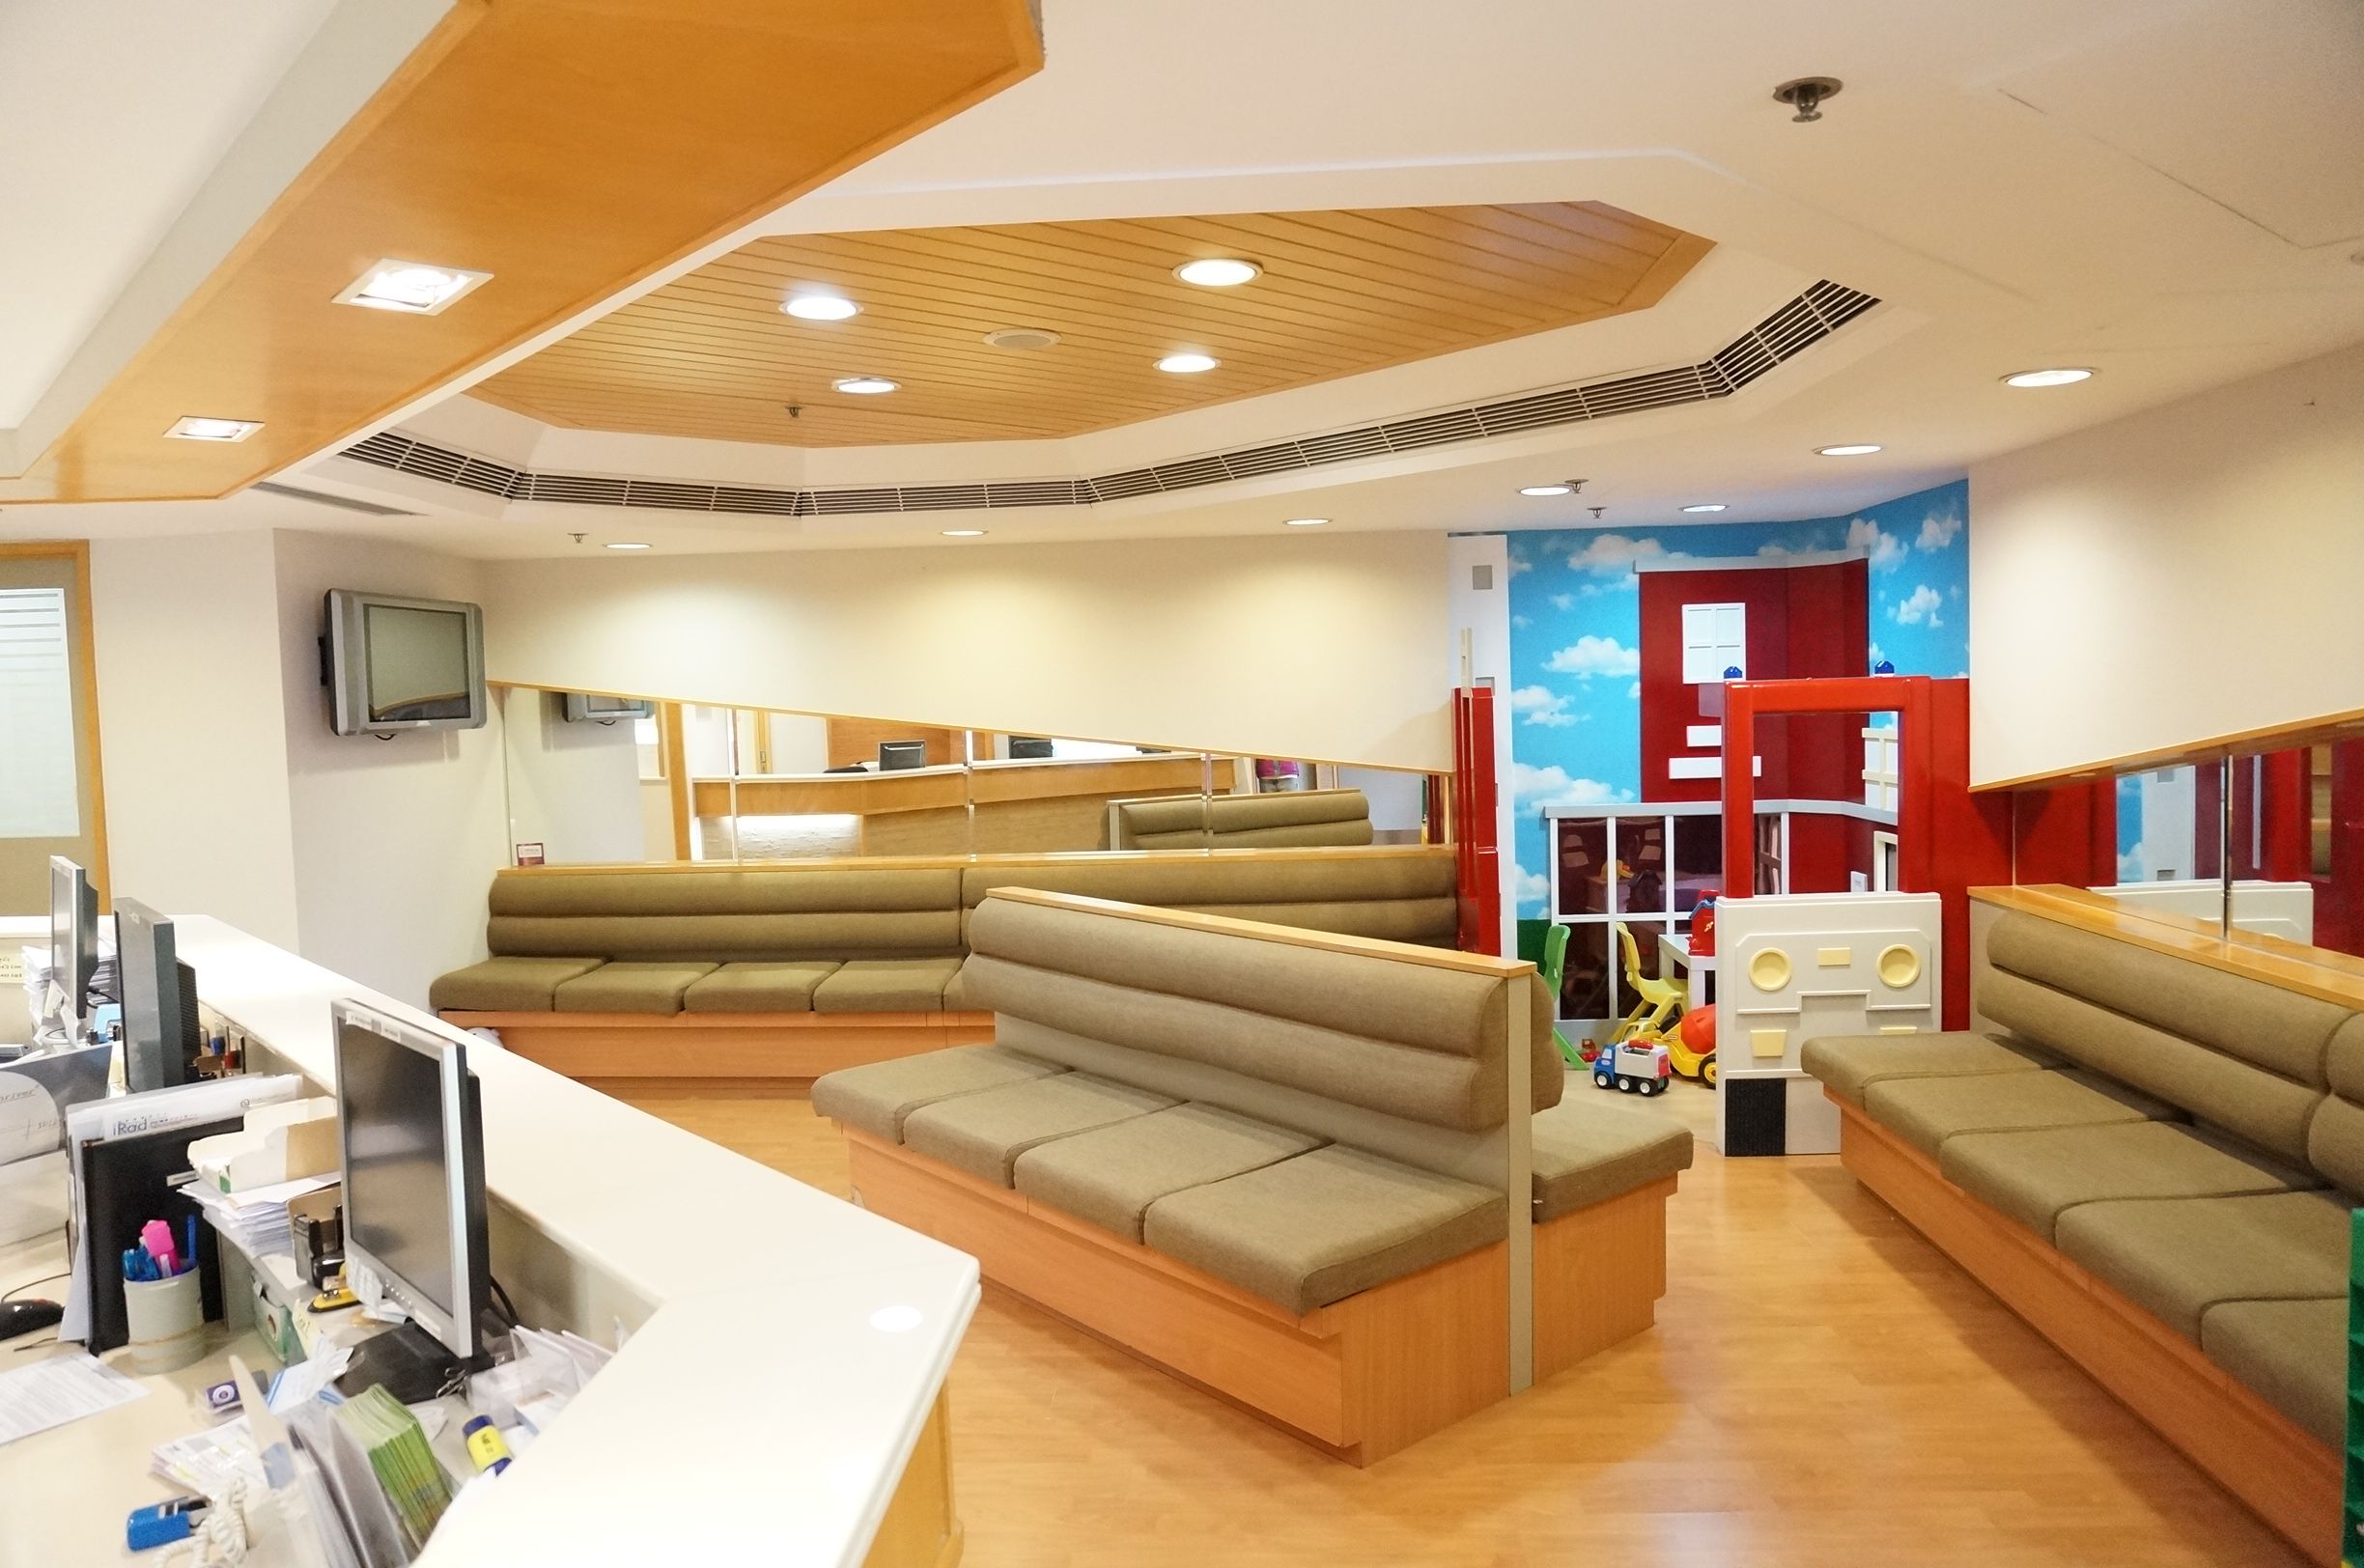 Quality HealthCare Medical Centre reception and waiting area